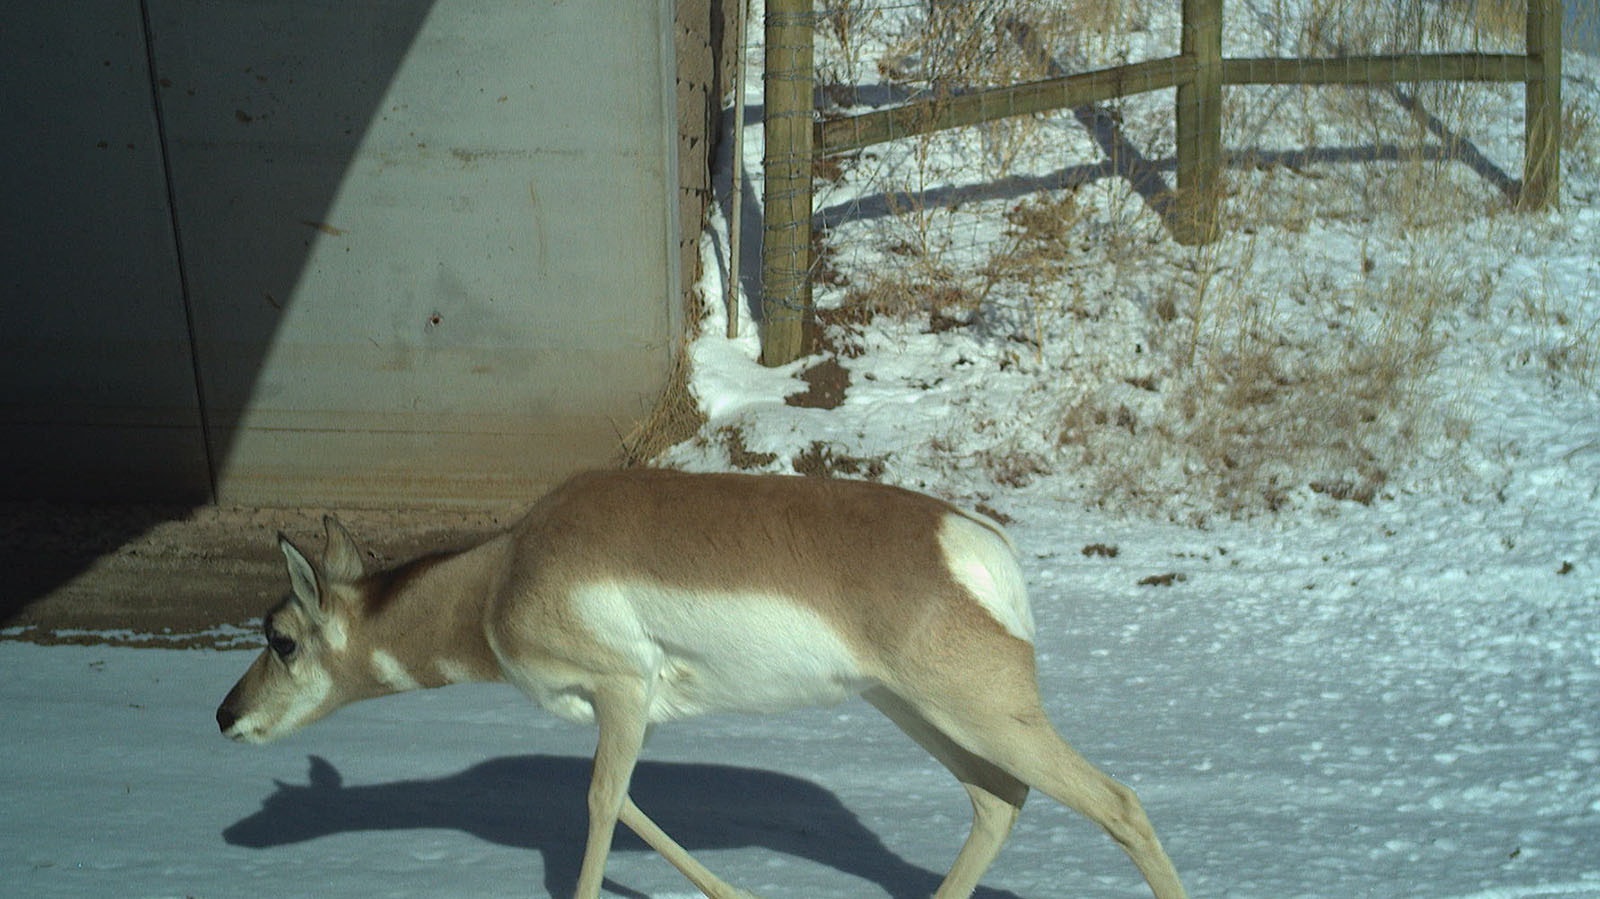 Antelope have joined deer and moose in using wildlife underpasses along Highway 189 between La Barge and Big Piney.